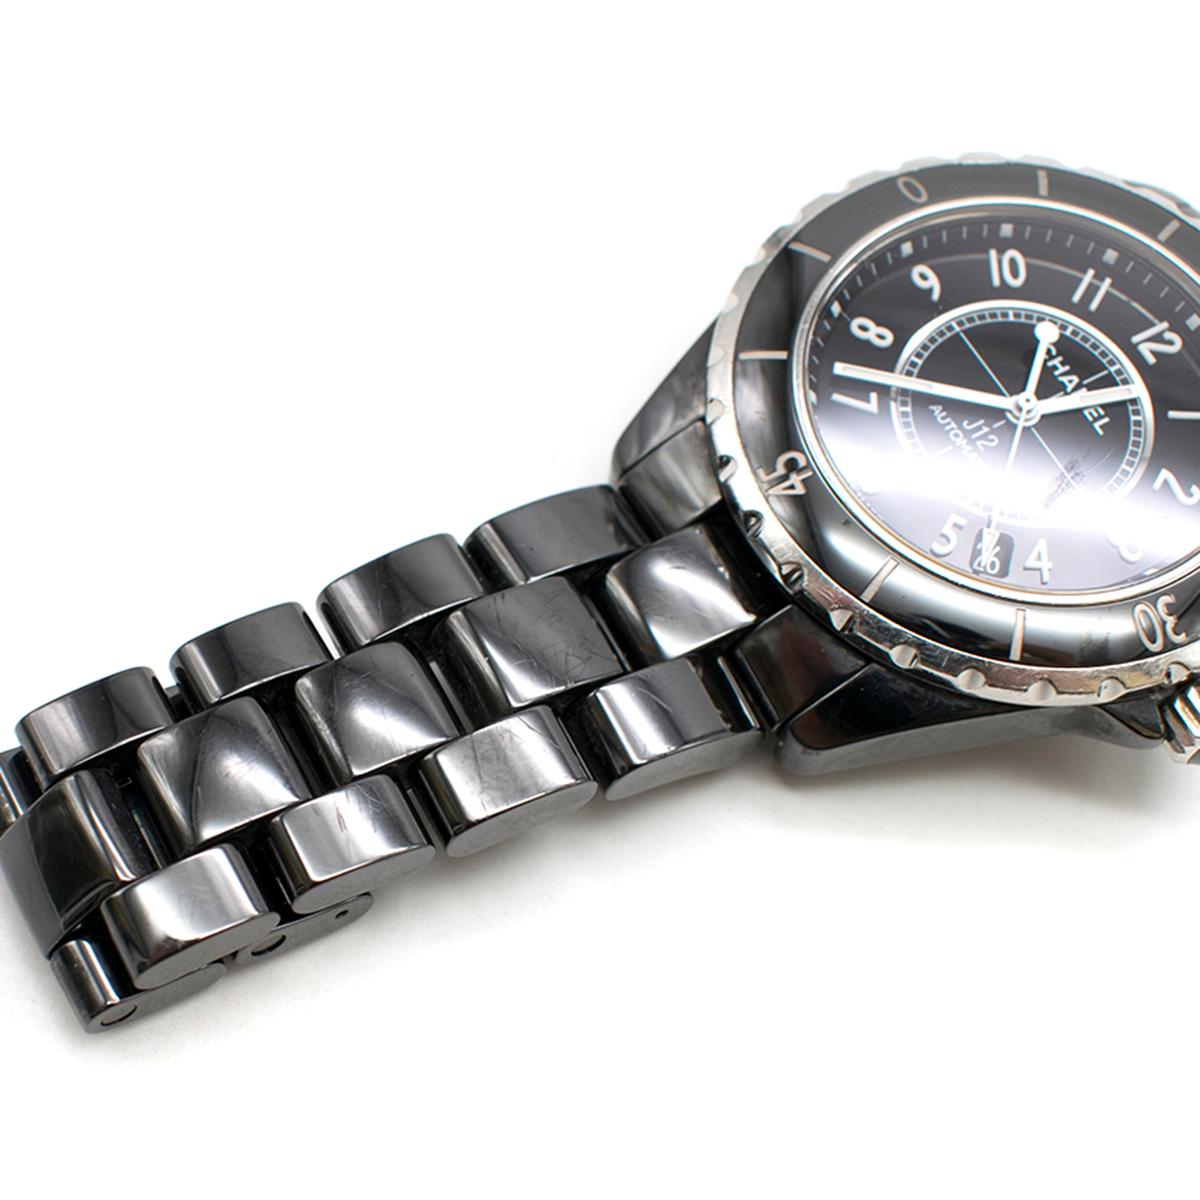 Chanel Black & Silver J12 200 m water resistance Automatic Watch  5